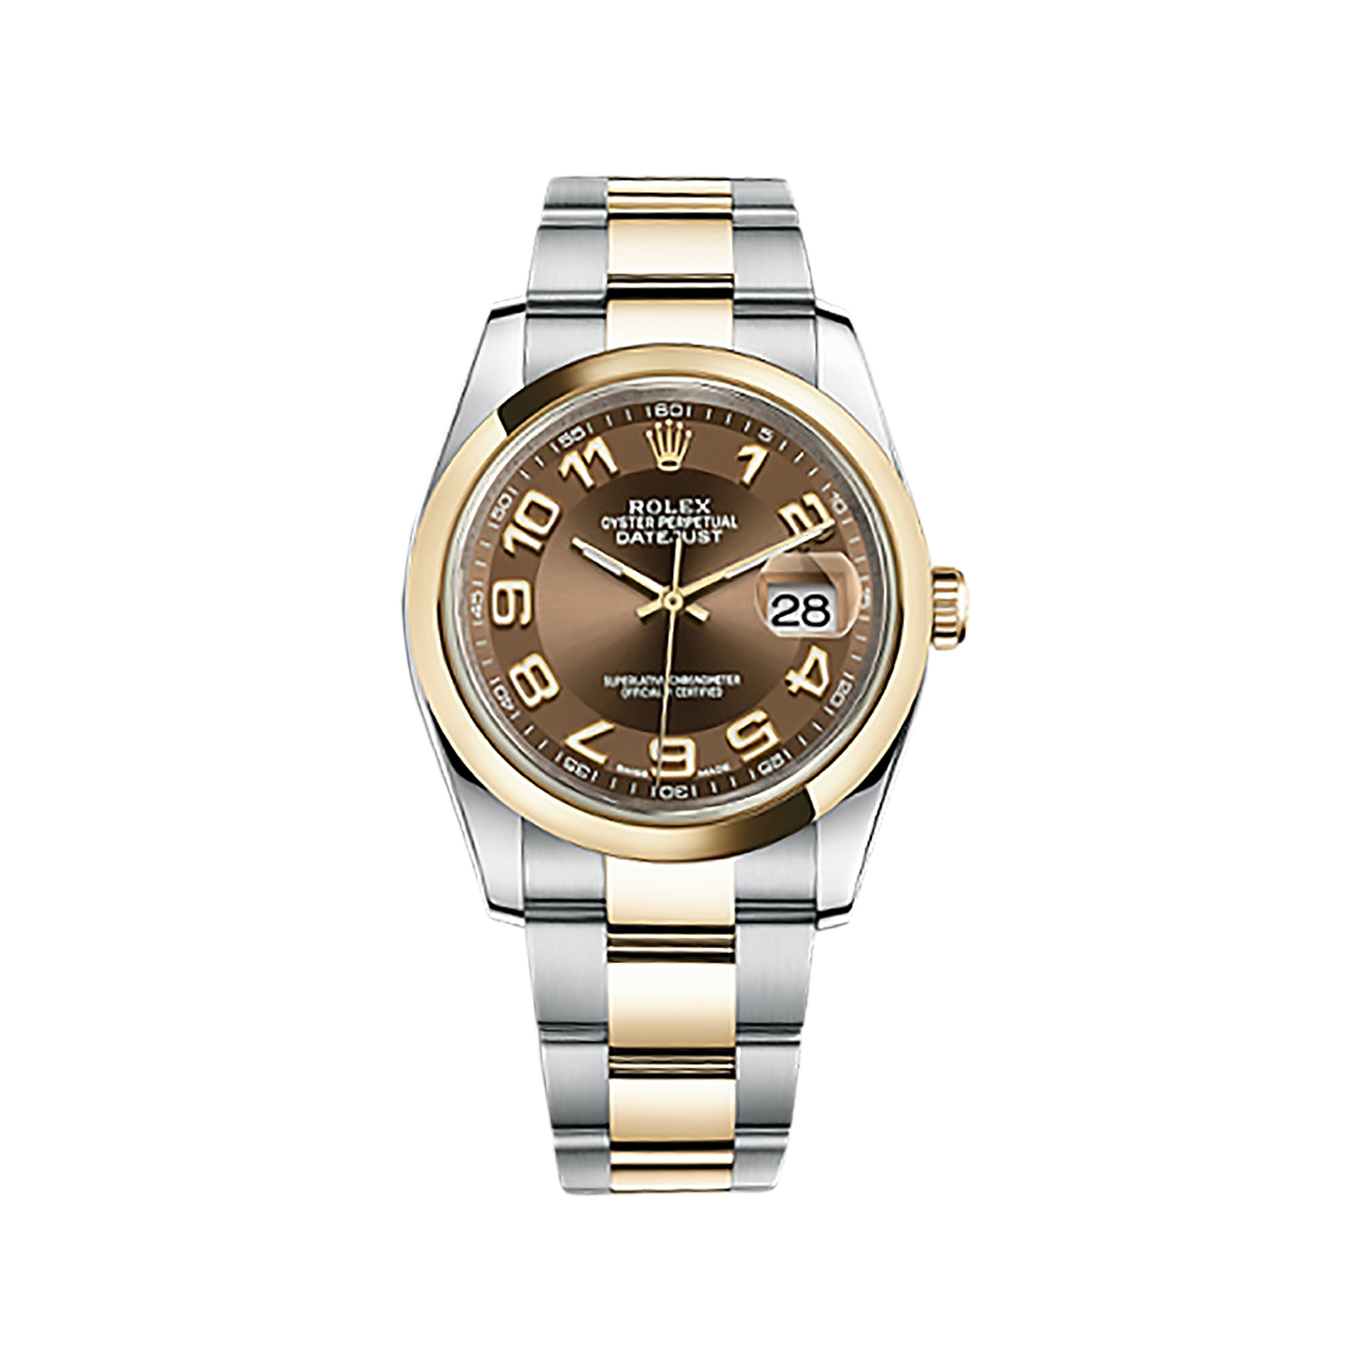 Datejust 36 116203 Gold & Stainless Steel Watch (Bronze) - Click Image to Close